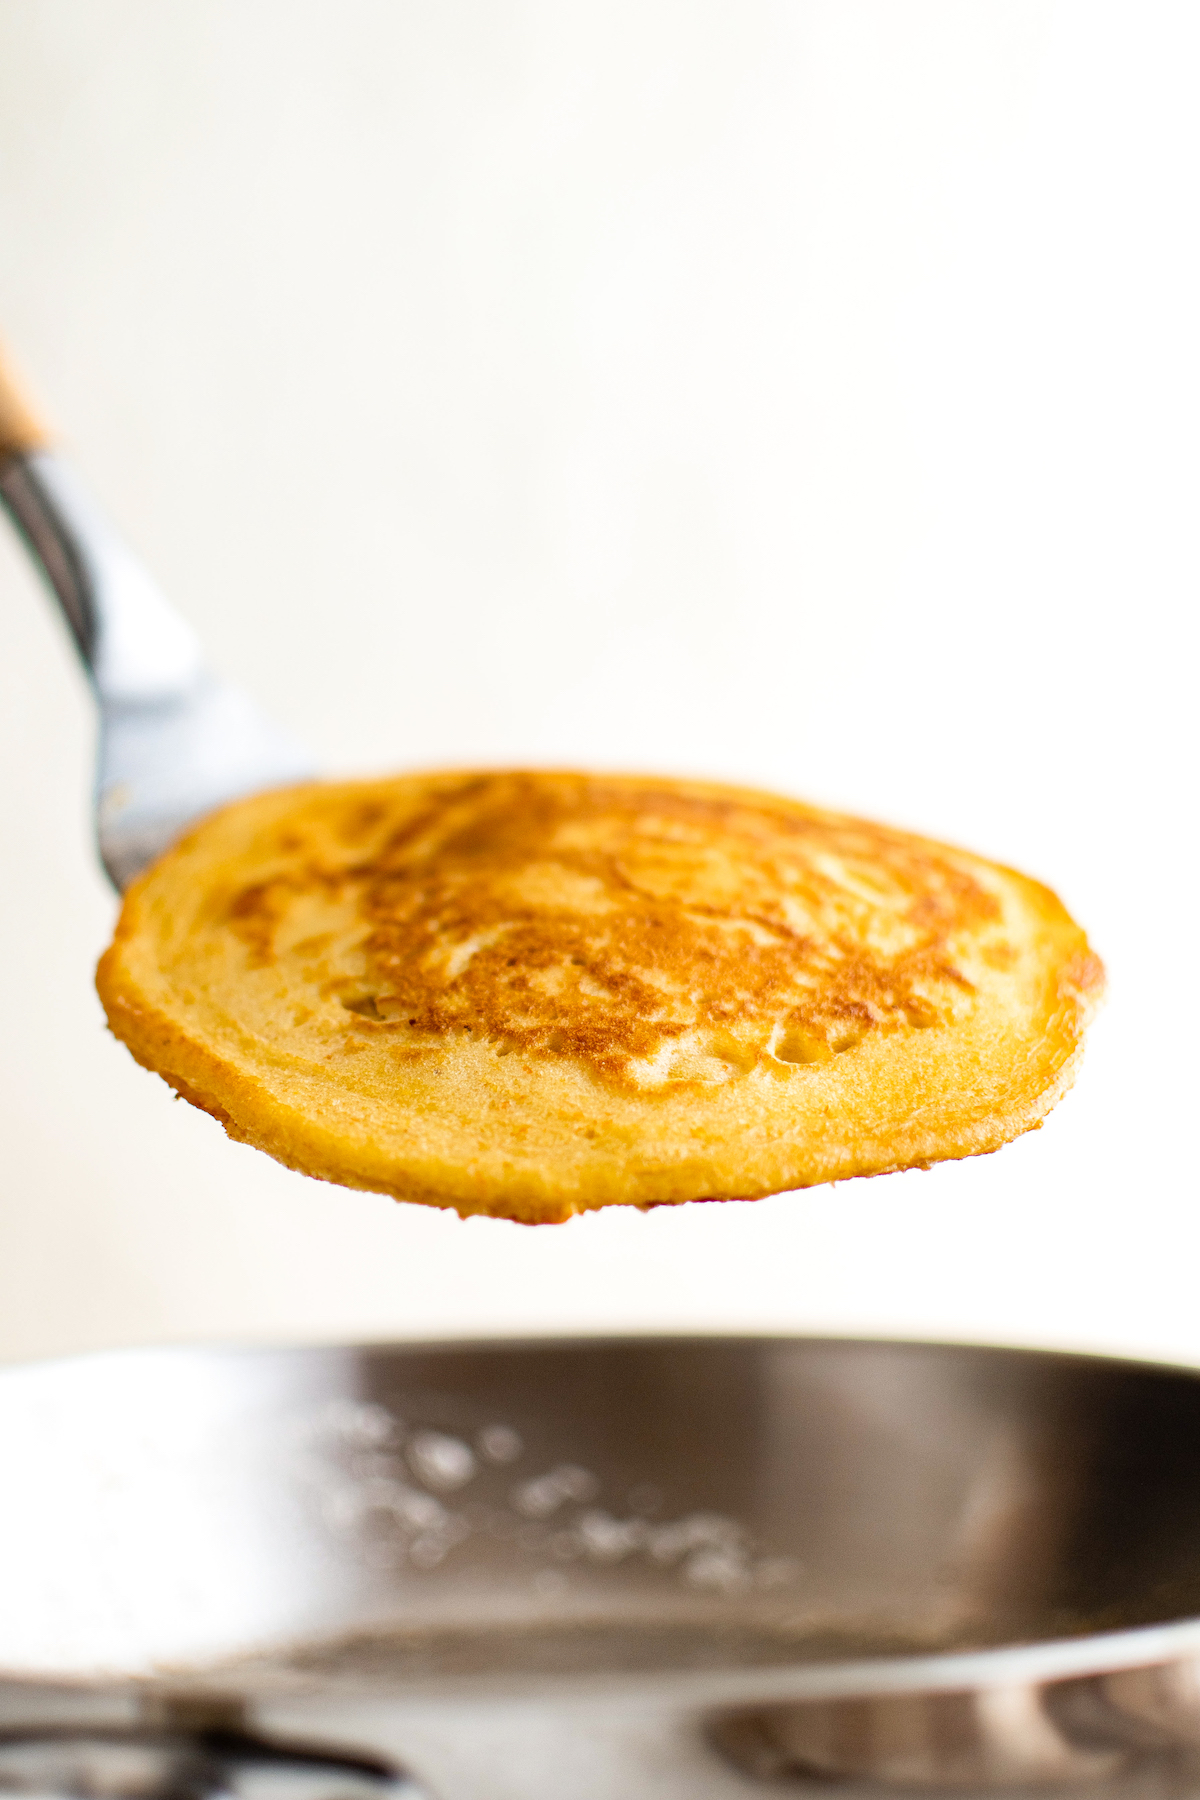 Lifting a cornmeal pancake from a skillet.